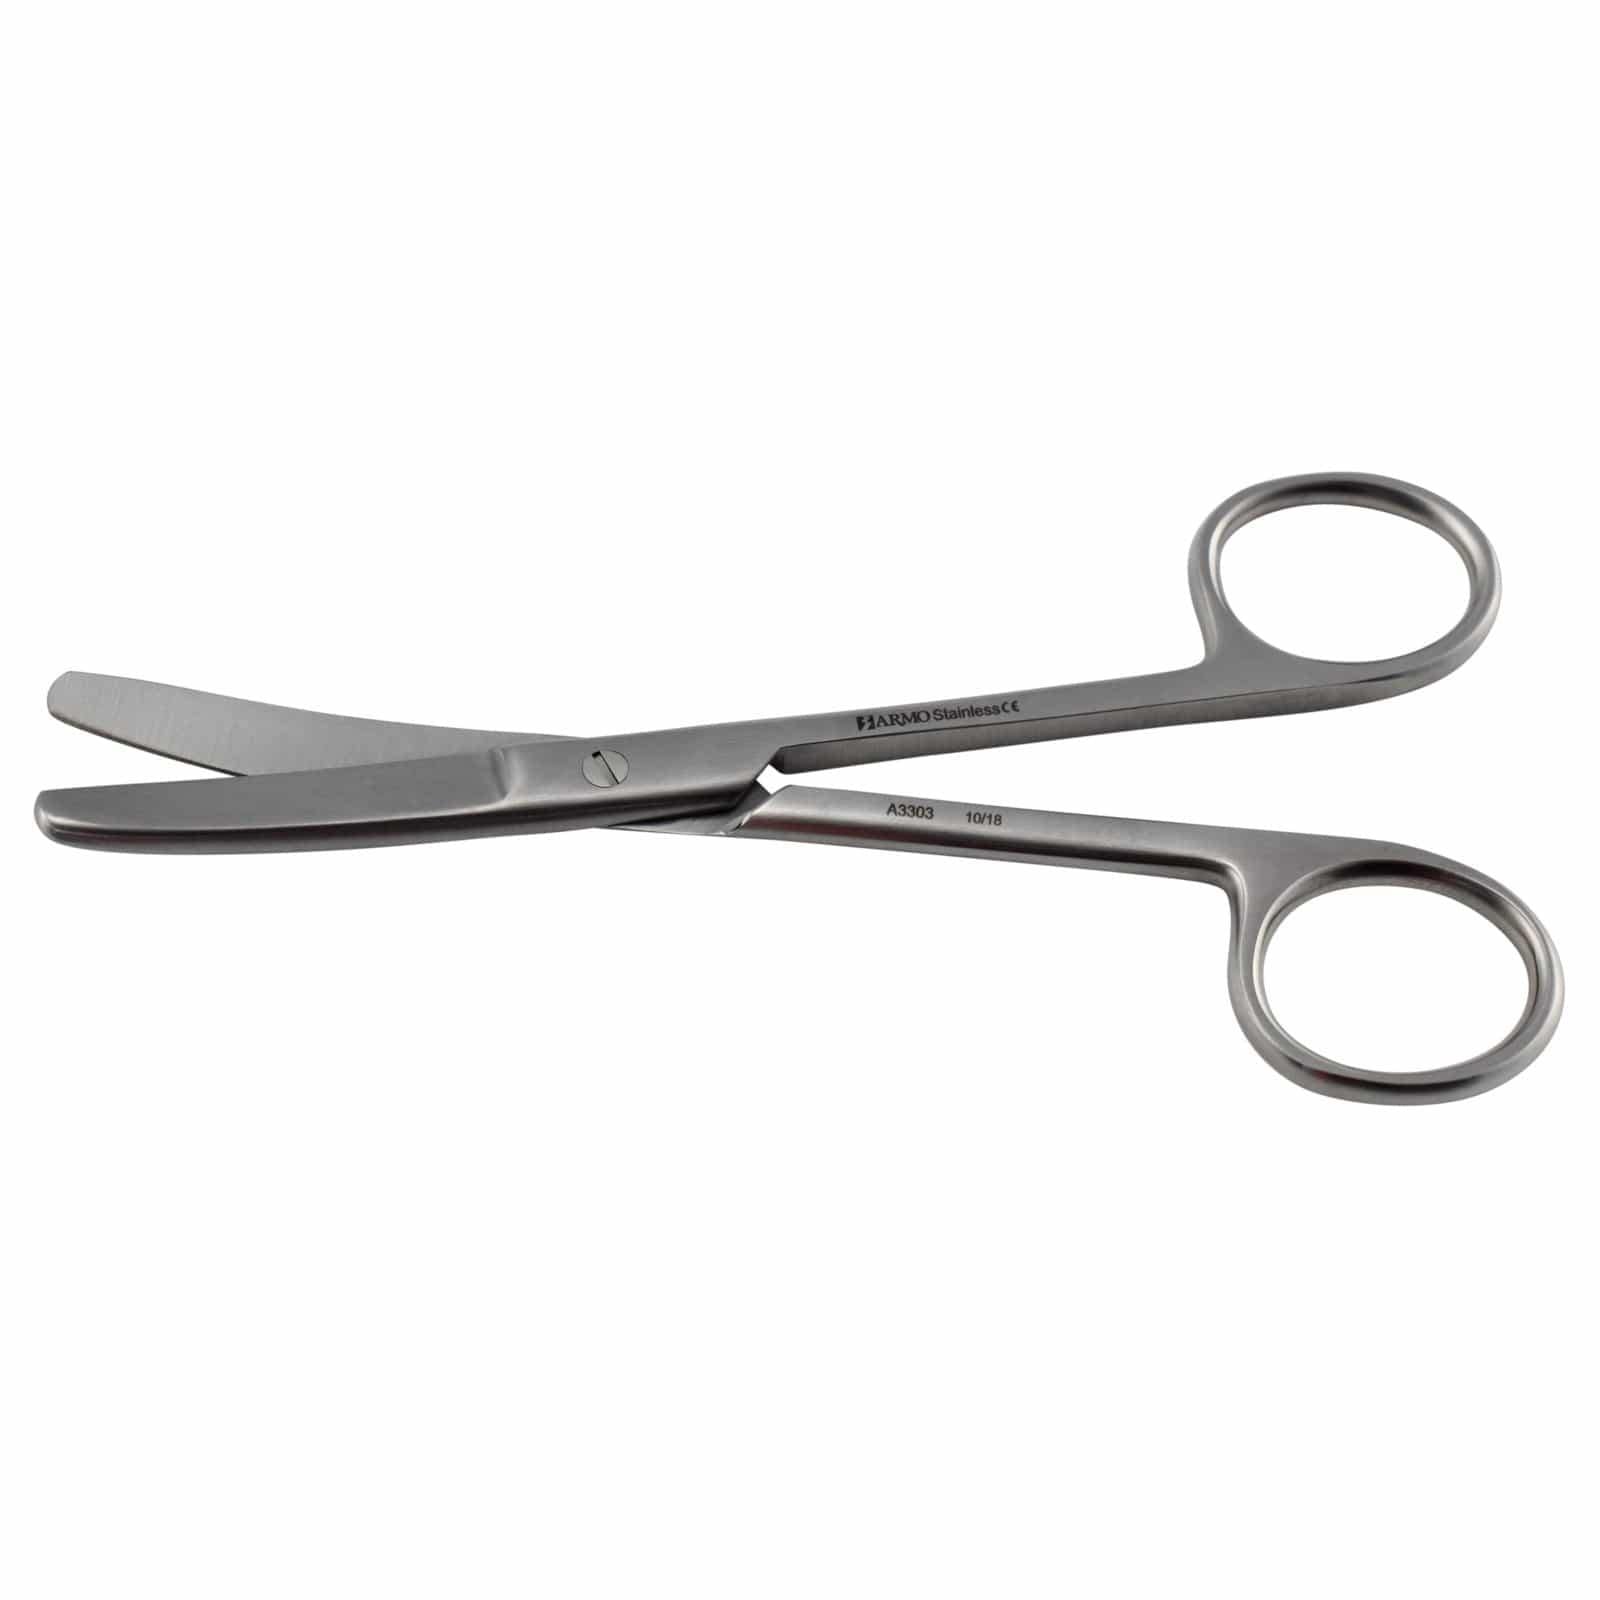 Armo Surgical Instruments 13cm / Curved / Blunt/Blunt Armo Surgical Scissors